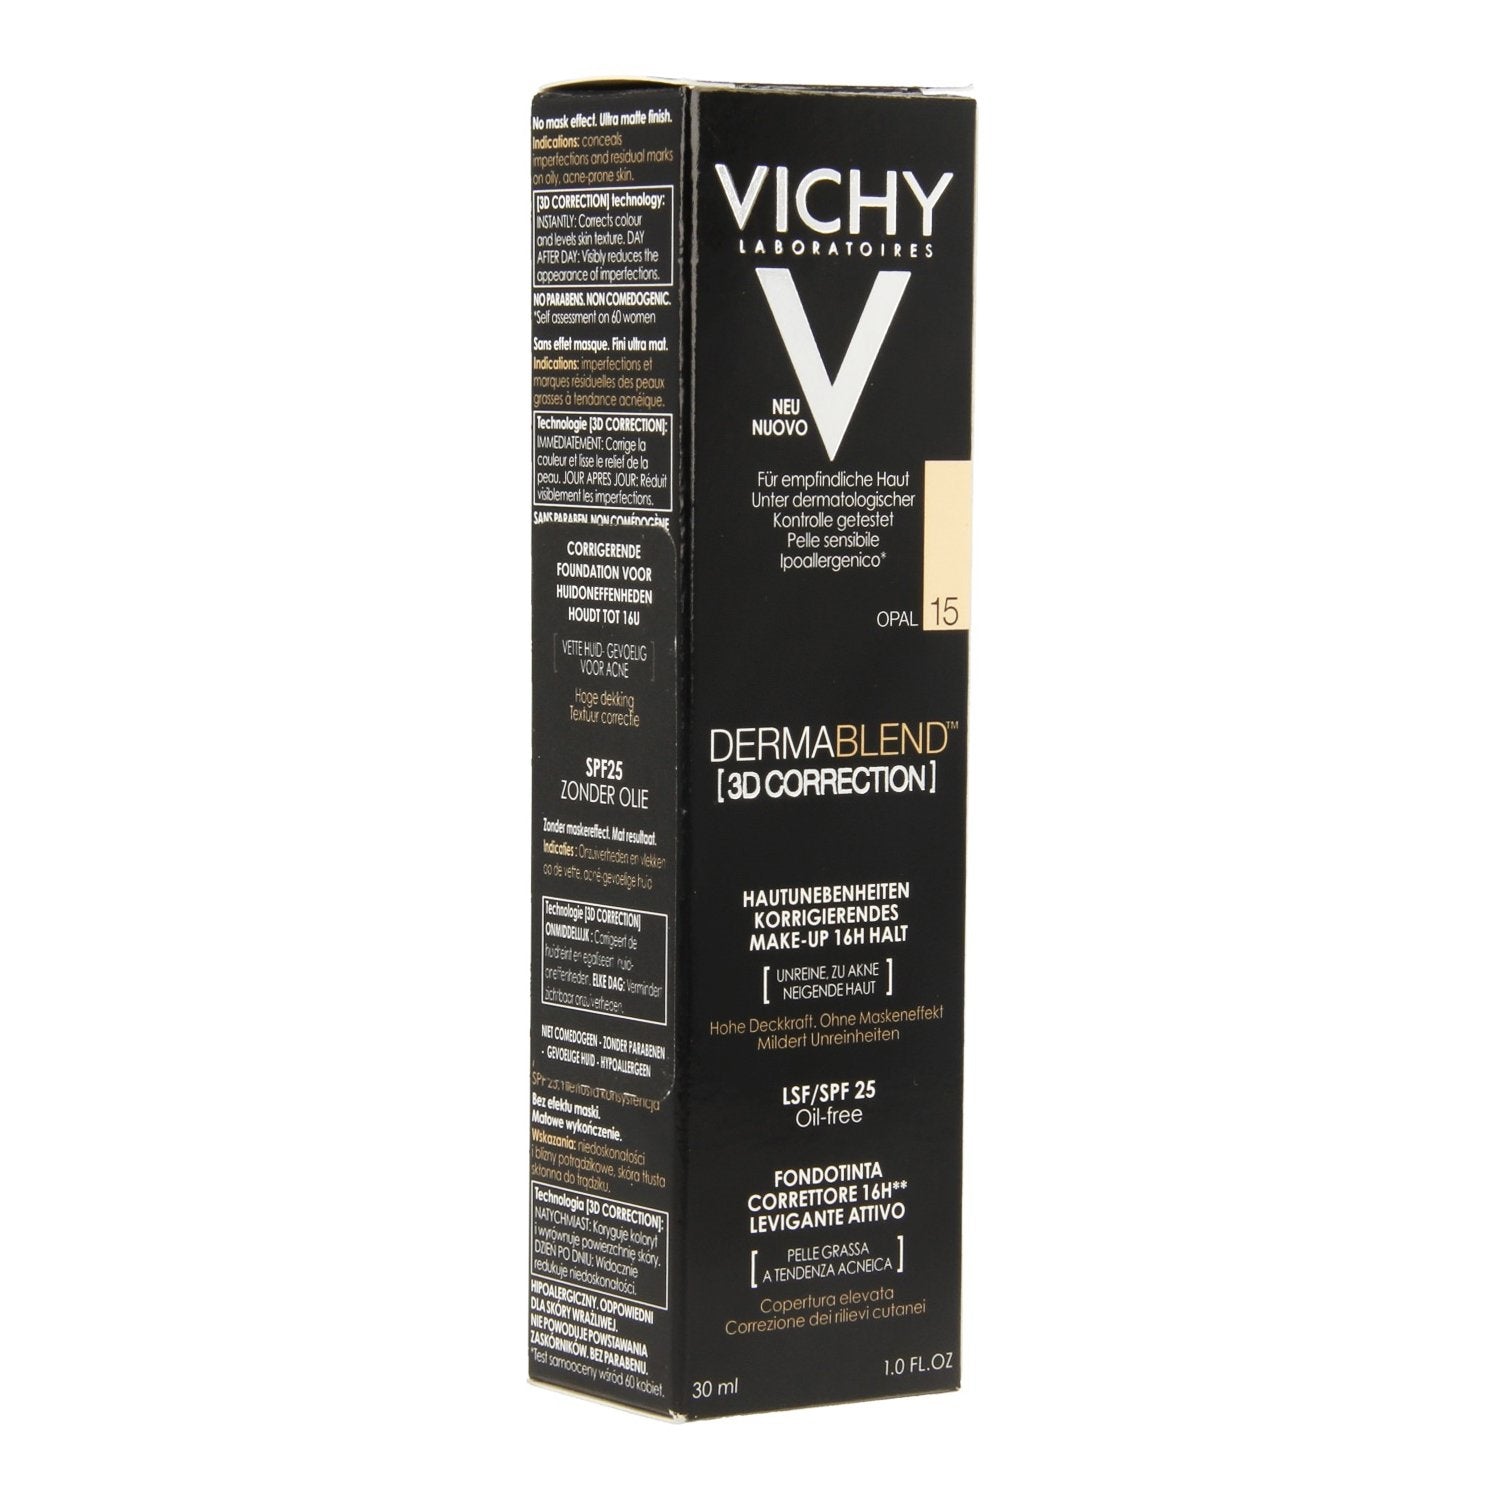 Vichy Dermablend 3d Correction 15 30ml